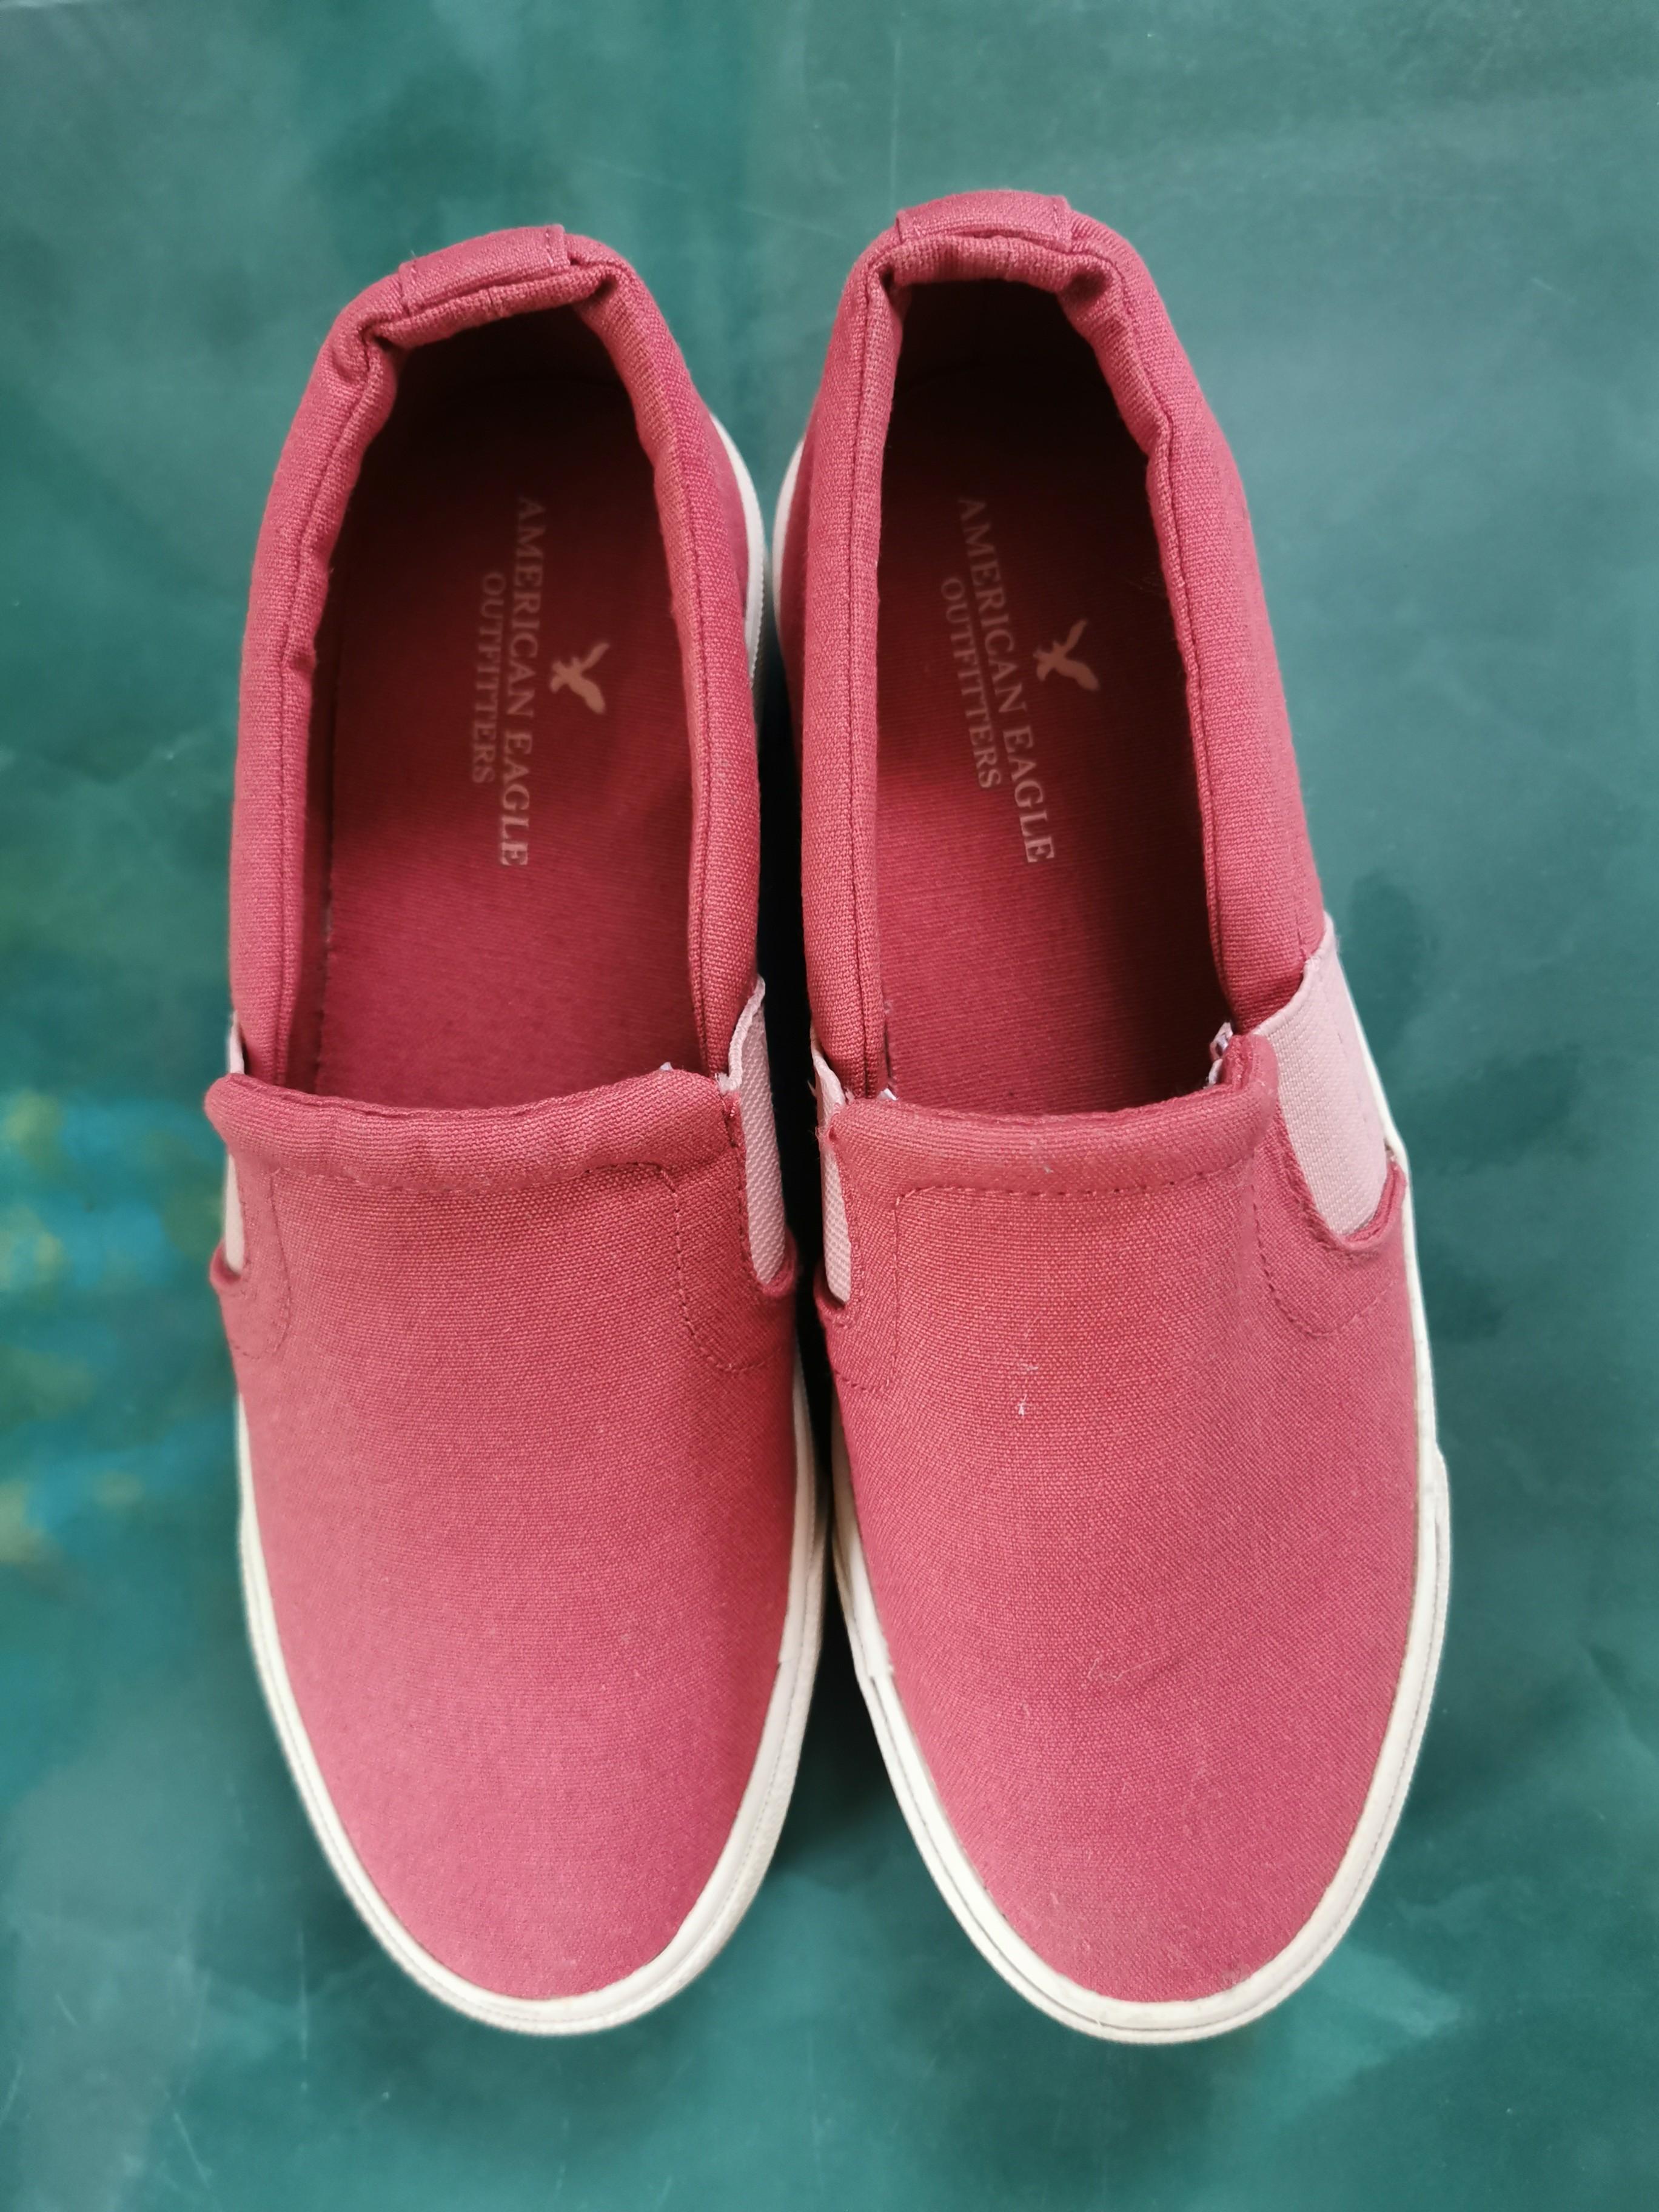 american eagle red shoes